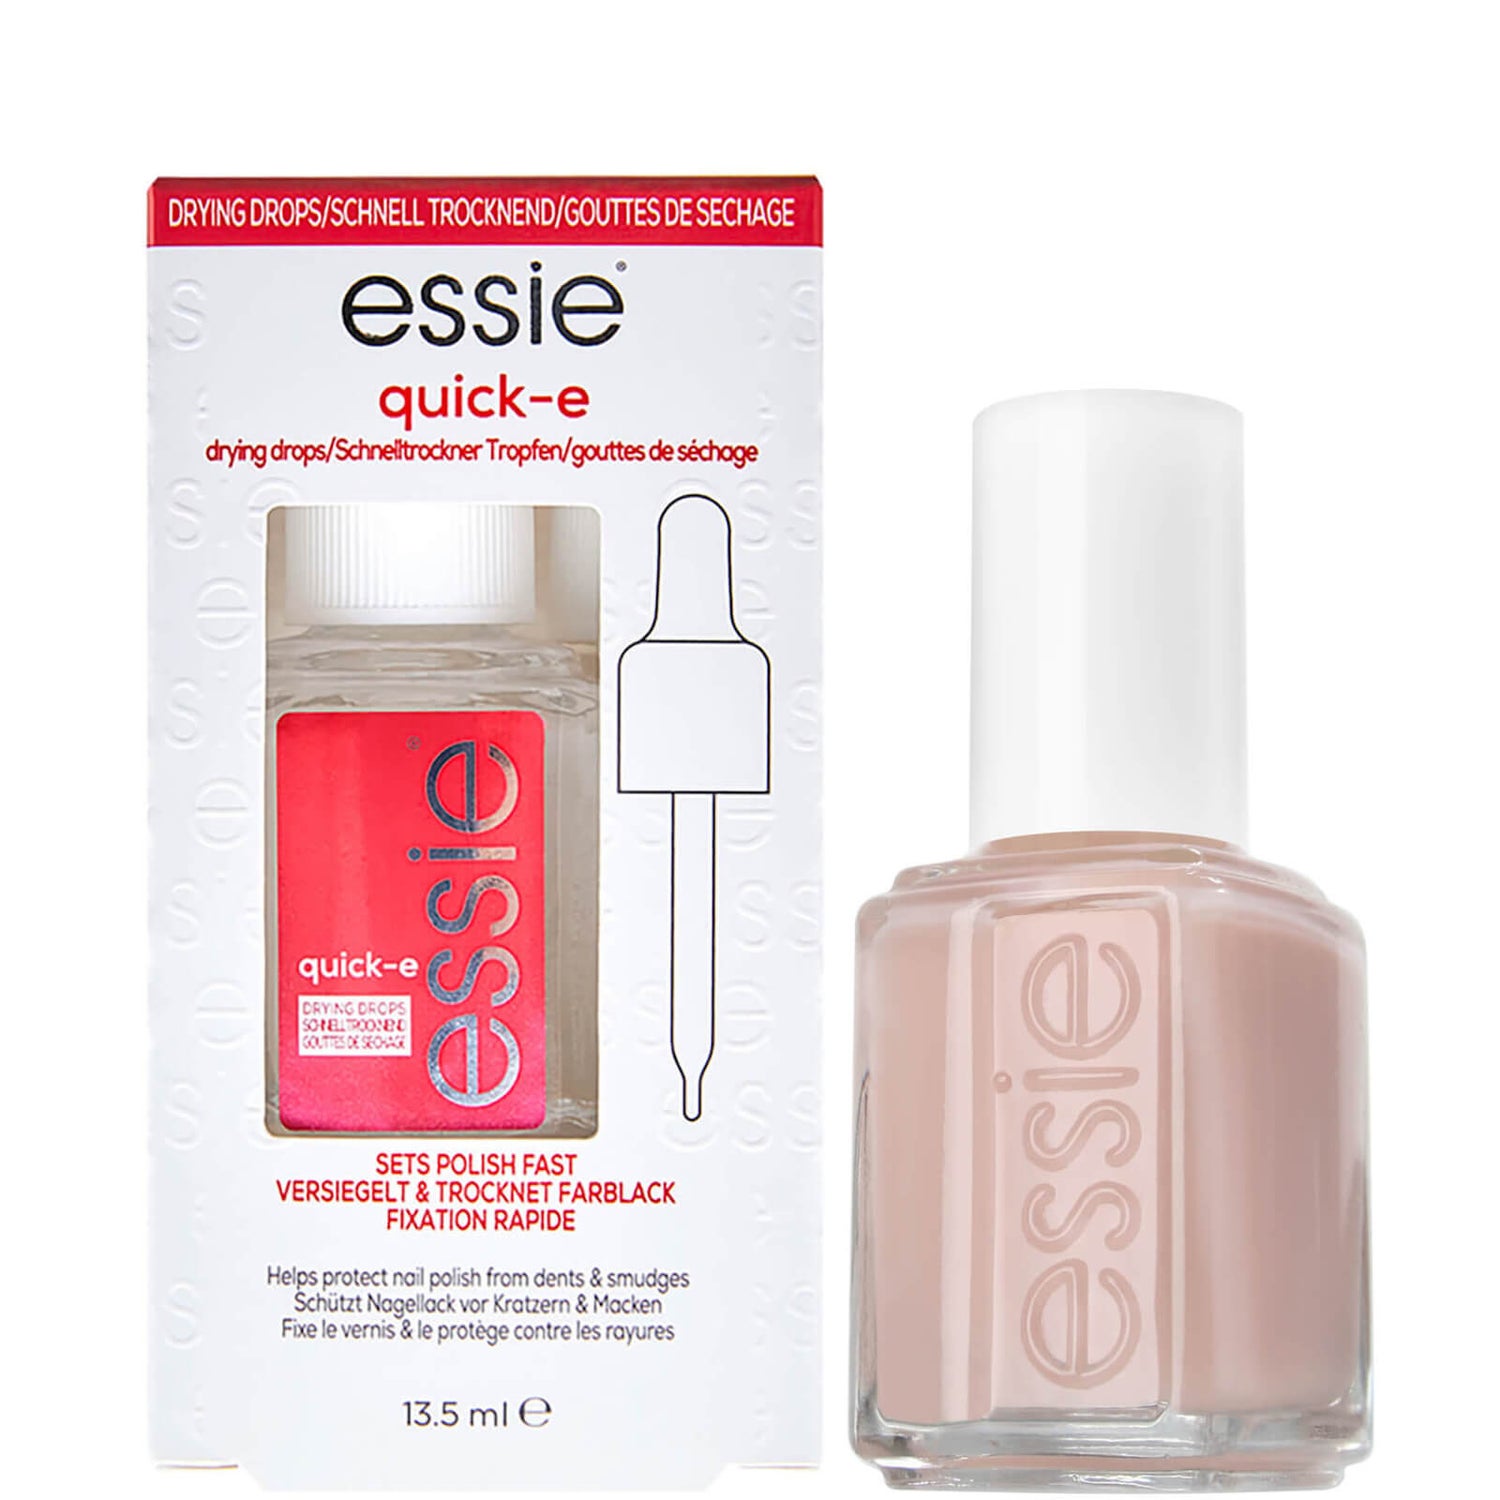 Essie Ballet Slippers Pink Nail Polish and Quick Dry Drops Kit Exclusive (Worth £16.98)